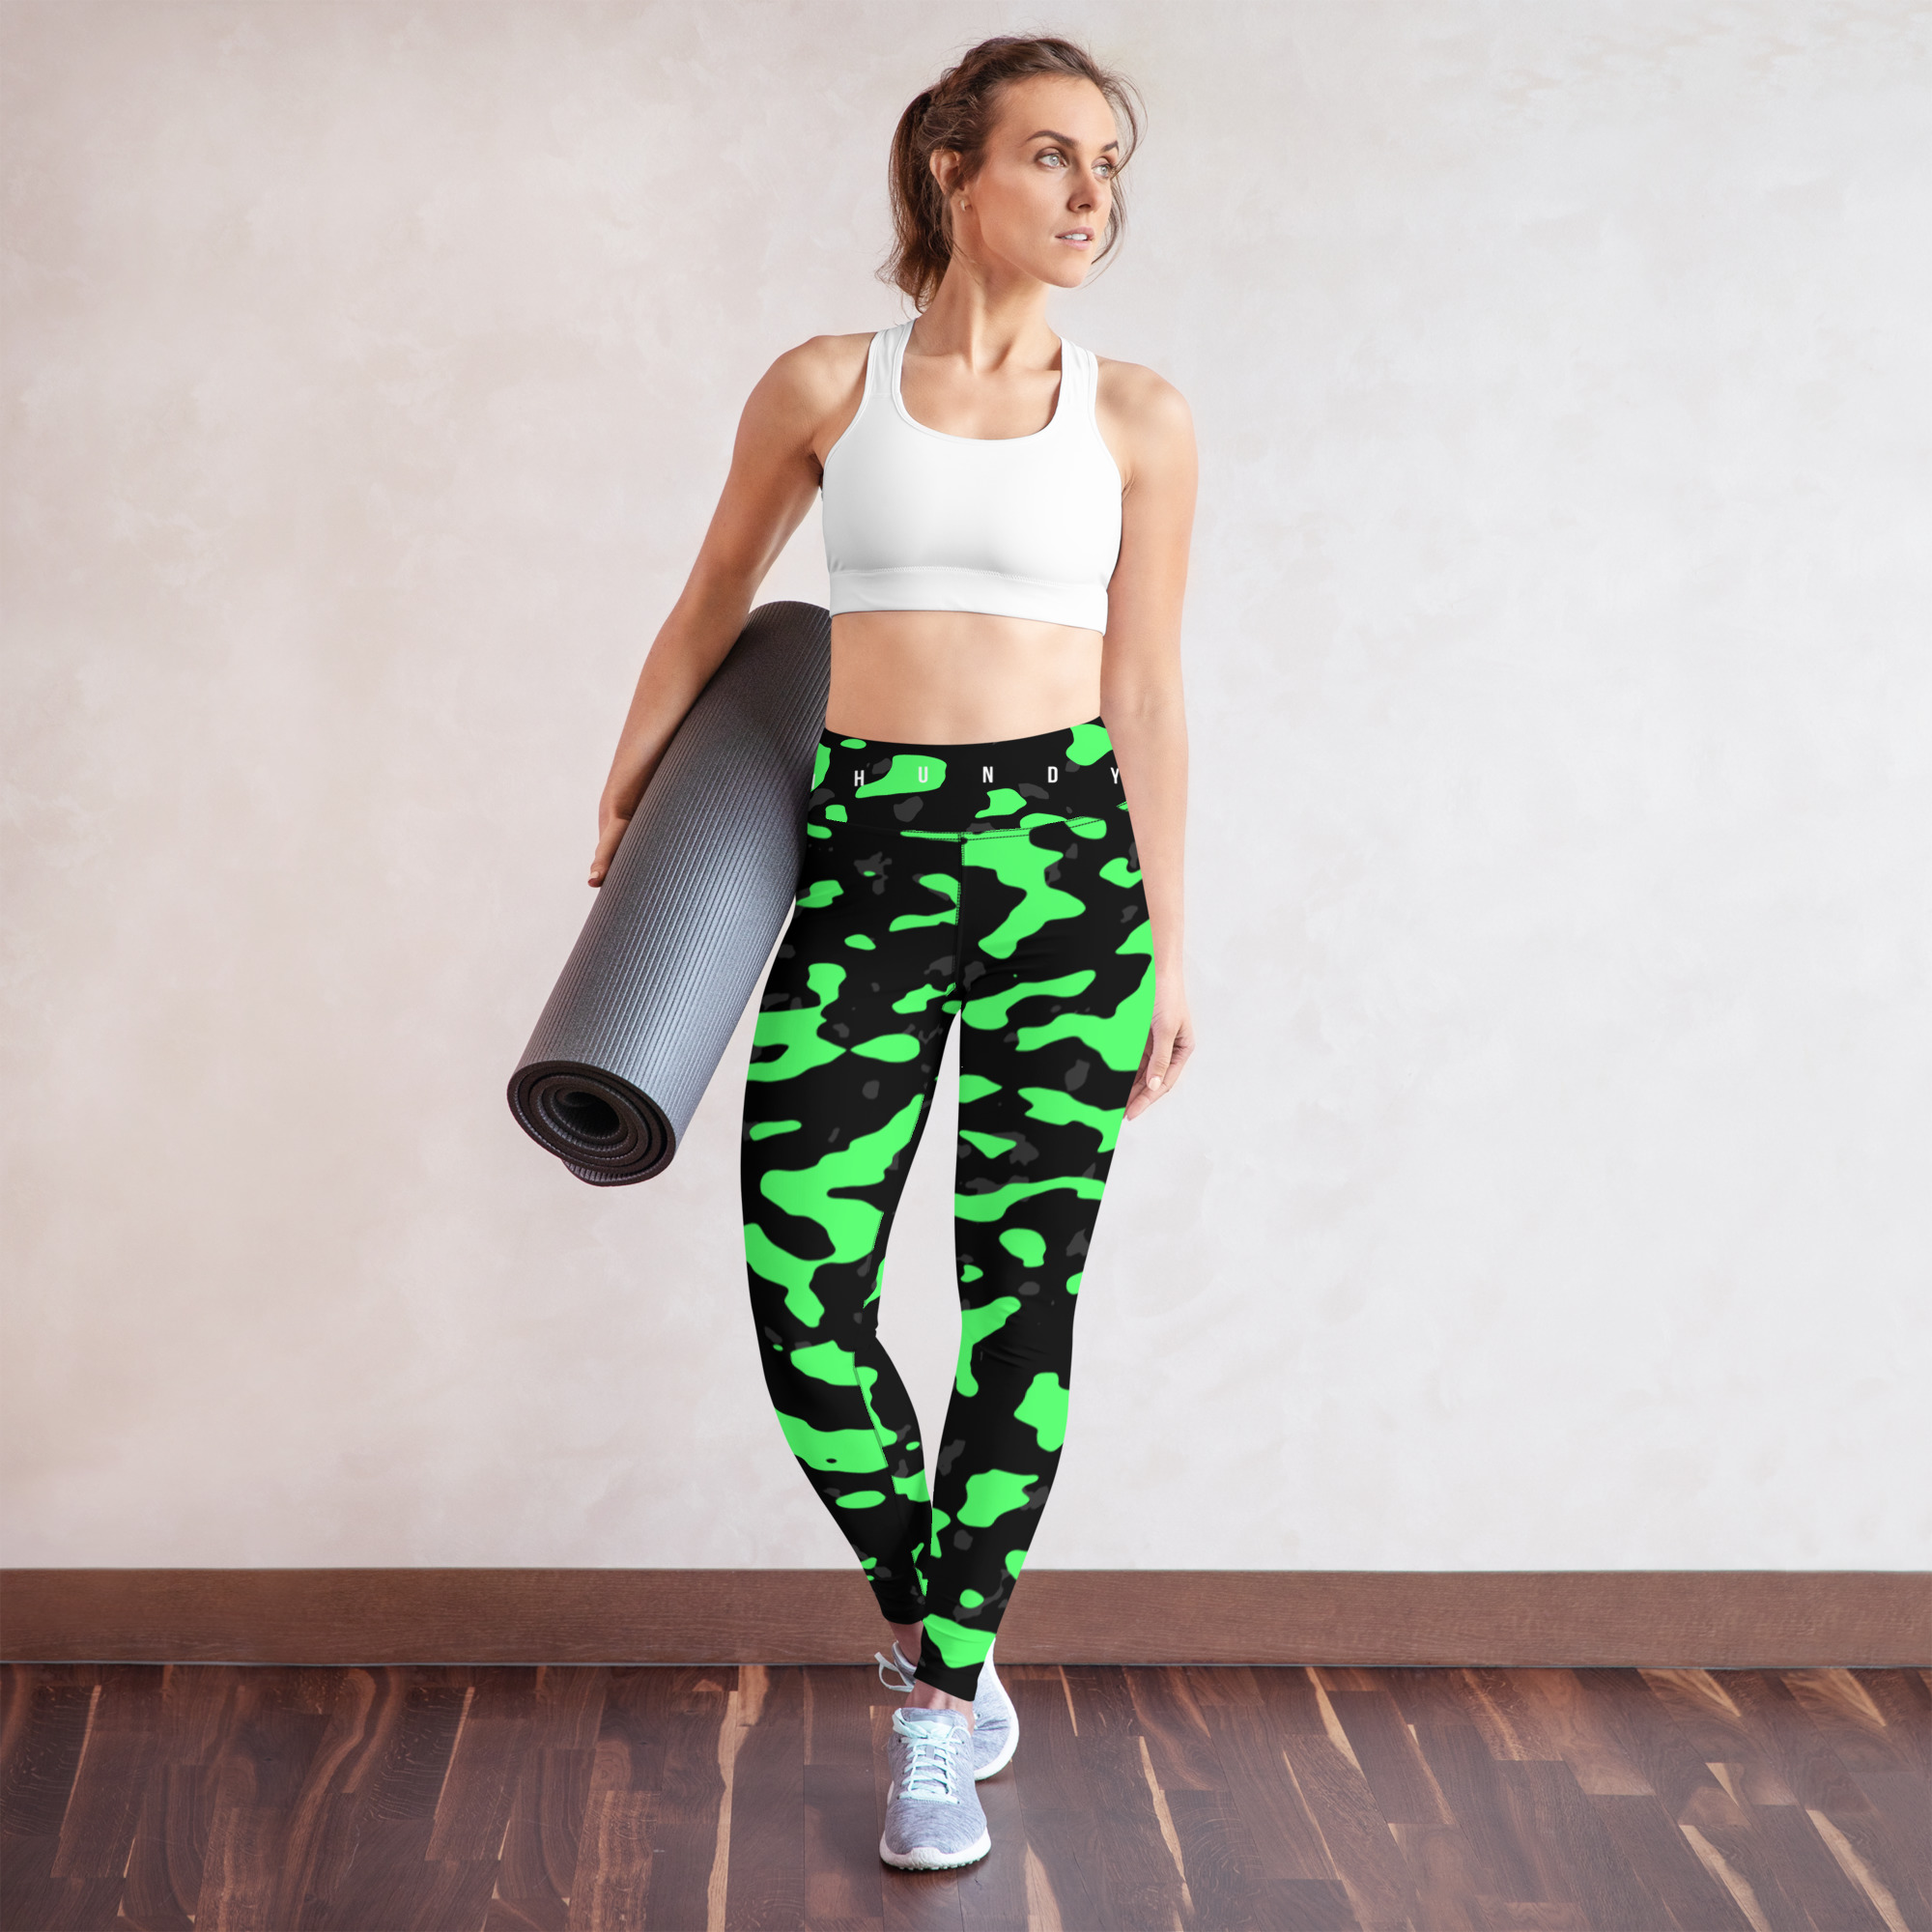 Revive Camo High Waisted Leggings - 1HUNDY Official Store, Gym & Fitness  Apparel